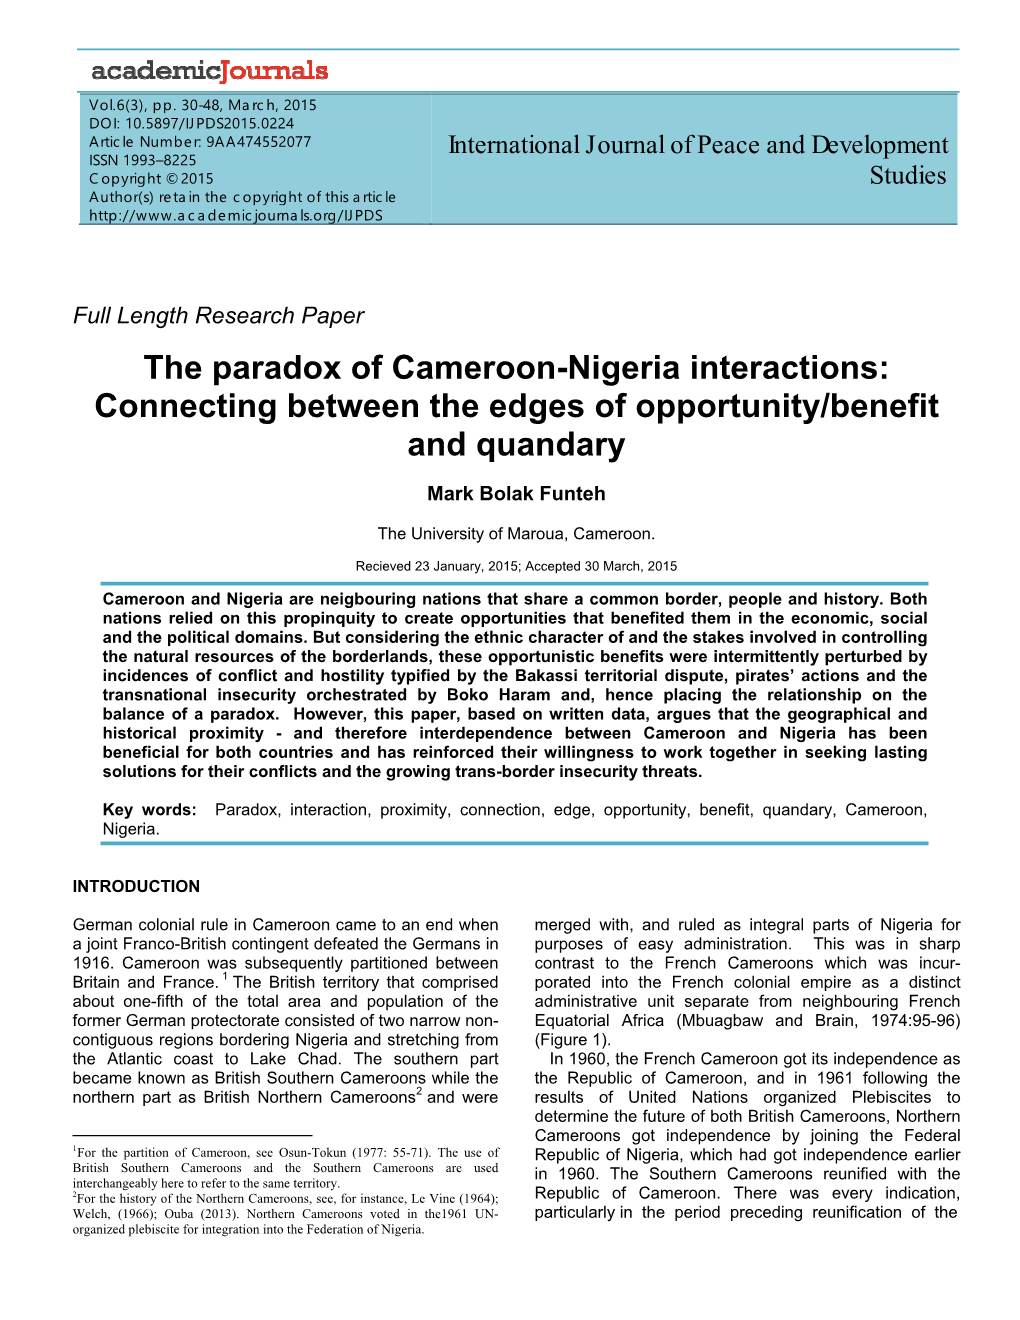 The Paradox of Cameroon-Nigeria Interactions: Connecting Between the Edges of Opportunity/Benefit and Quandary